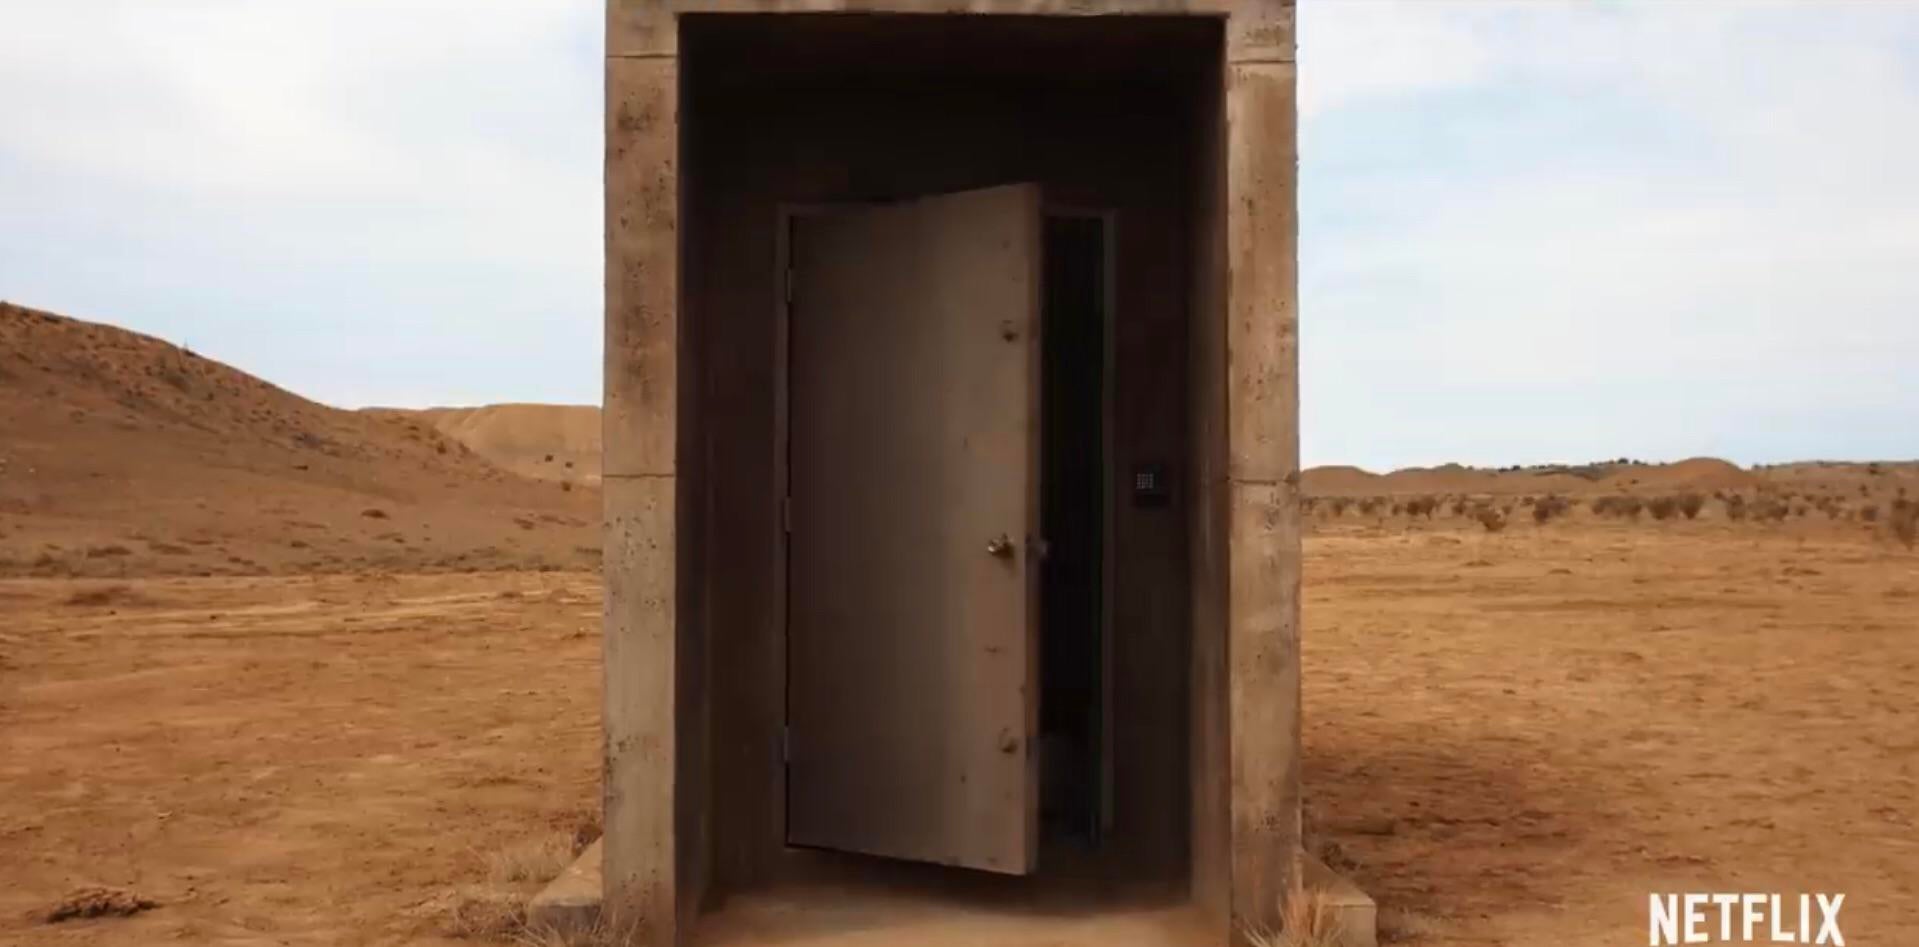 A door in the middle of the desert. 'Stranger Things' Season 4 release date announced on Feb. 17, 2022.